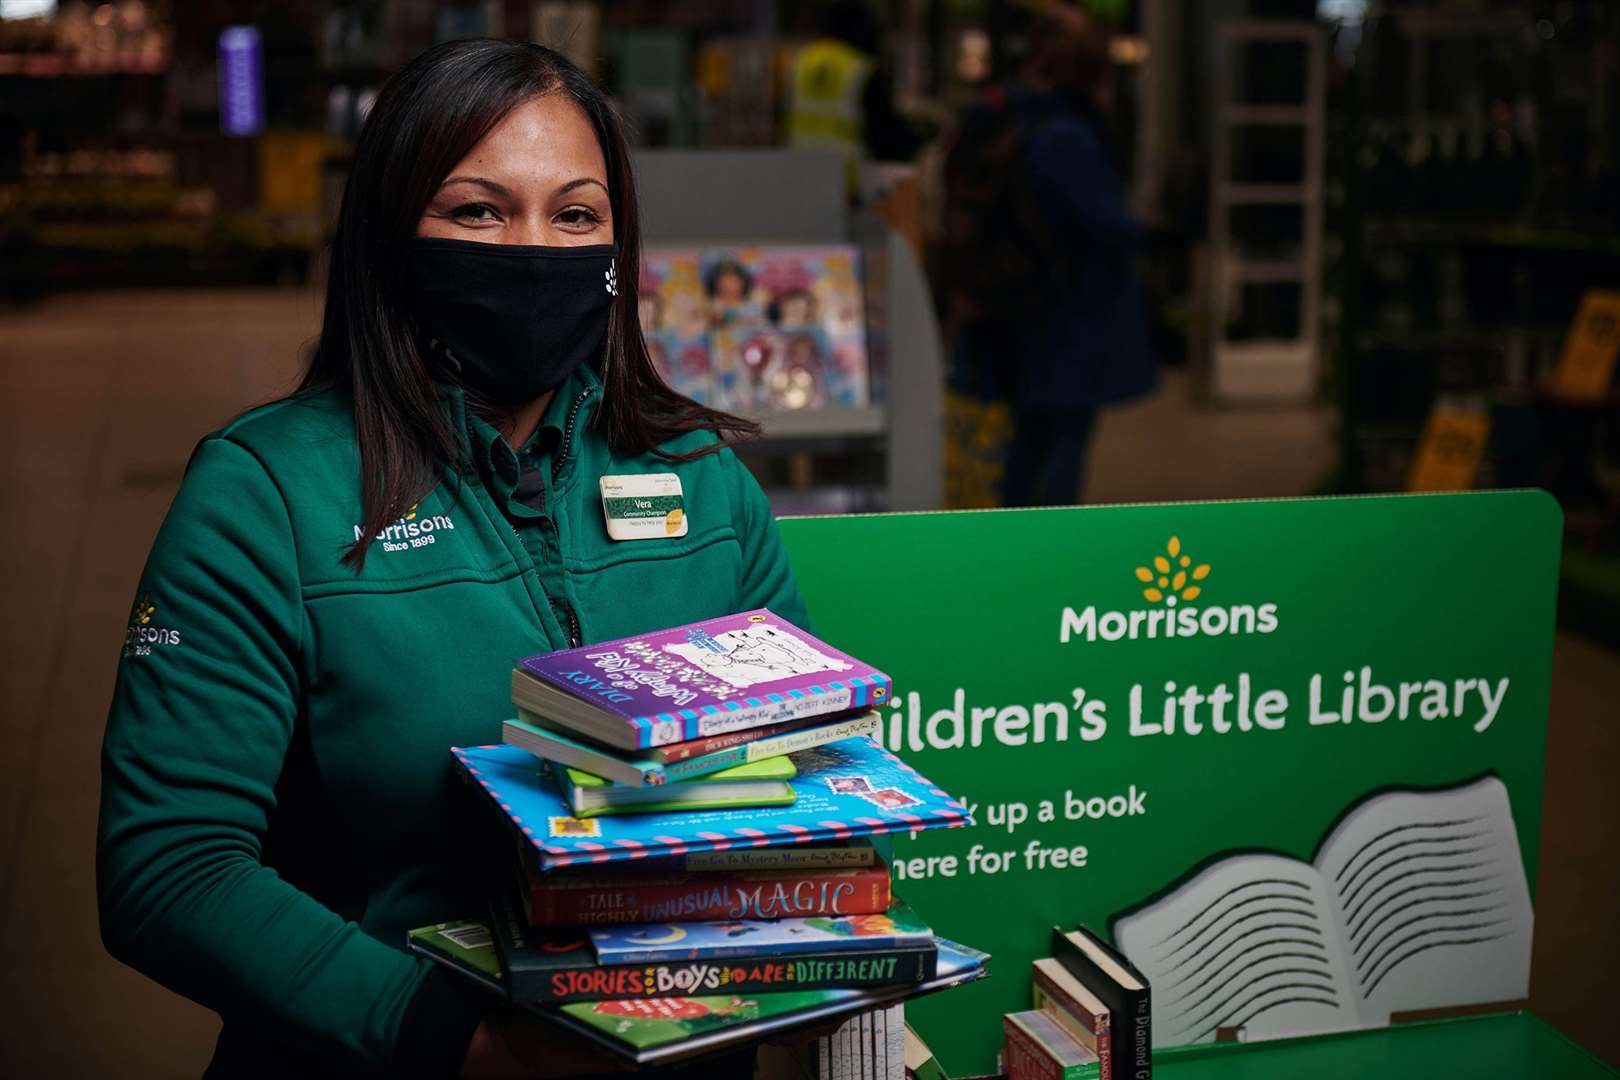 Shoppers will be asked to drop books off to their store's station for families to take home and enjoy